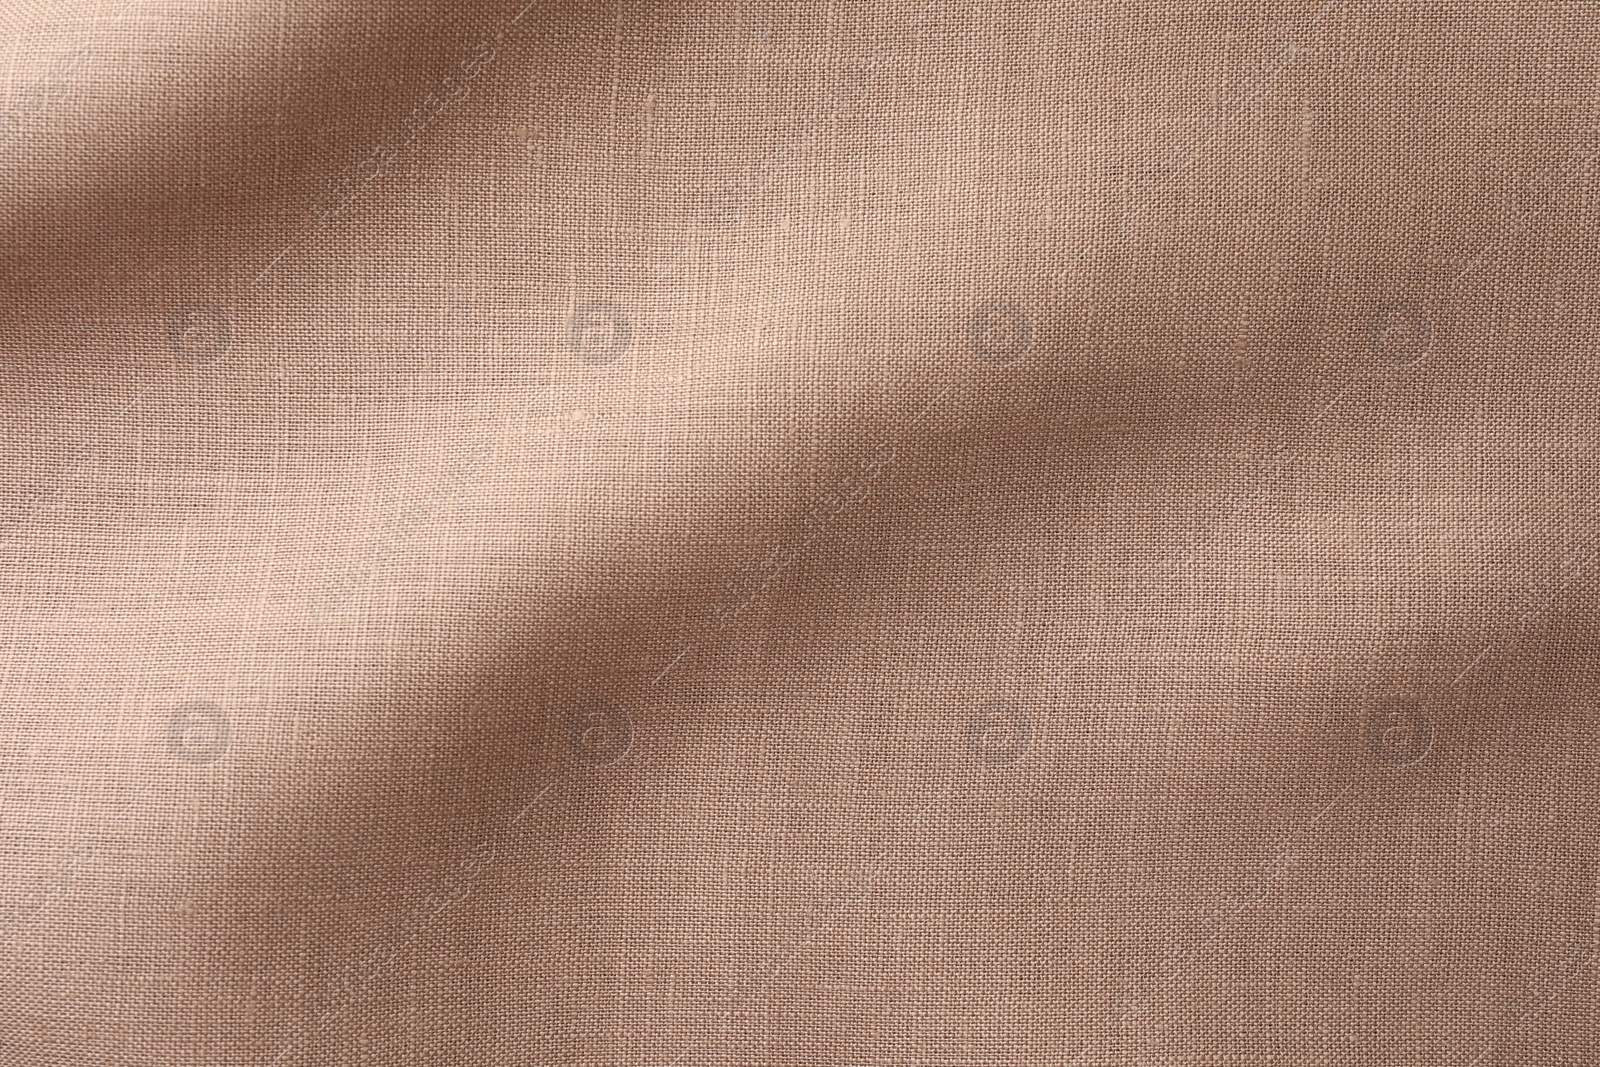 Photo of Texture of brown crumpled fabric as background, top view